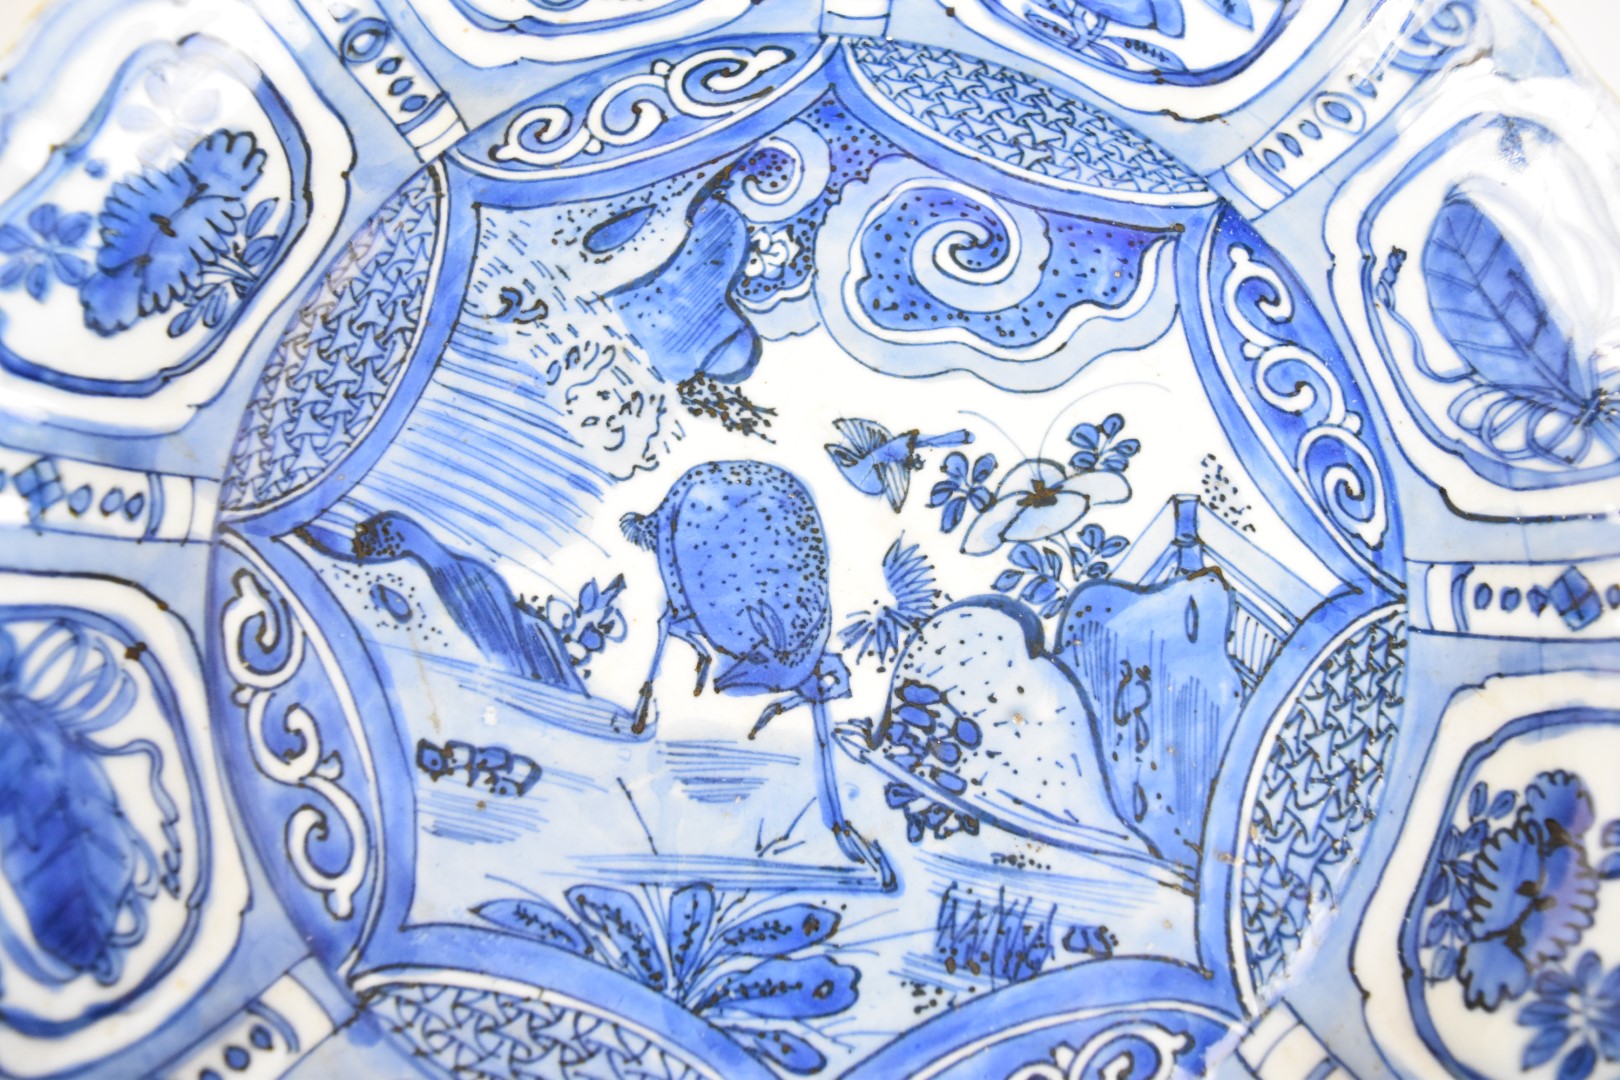 18th / 19thC Chinese Kraak porcelain charger with central decoration, diameter 31cm - Image 7 of 10